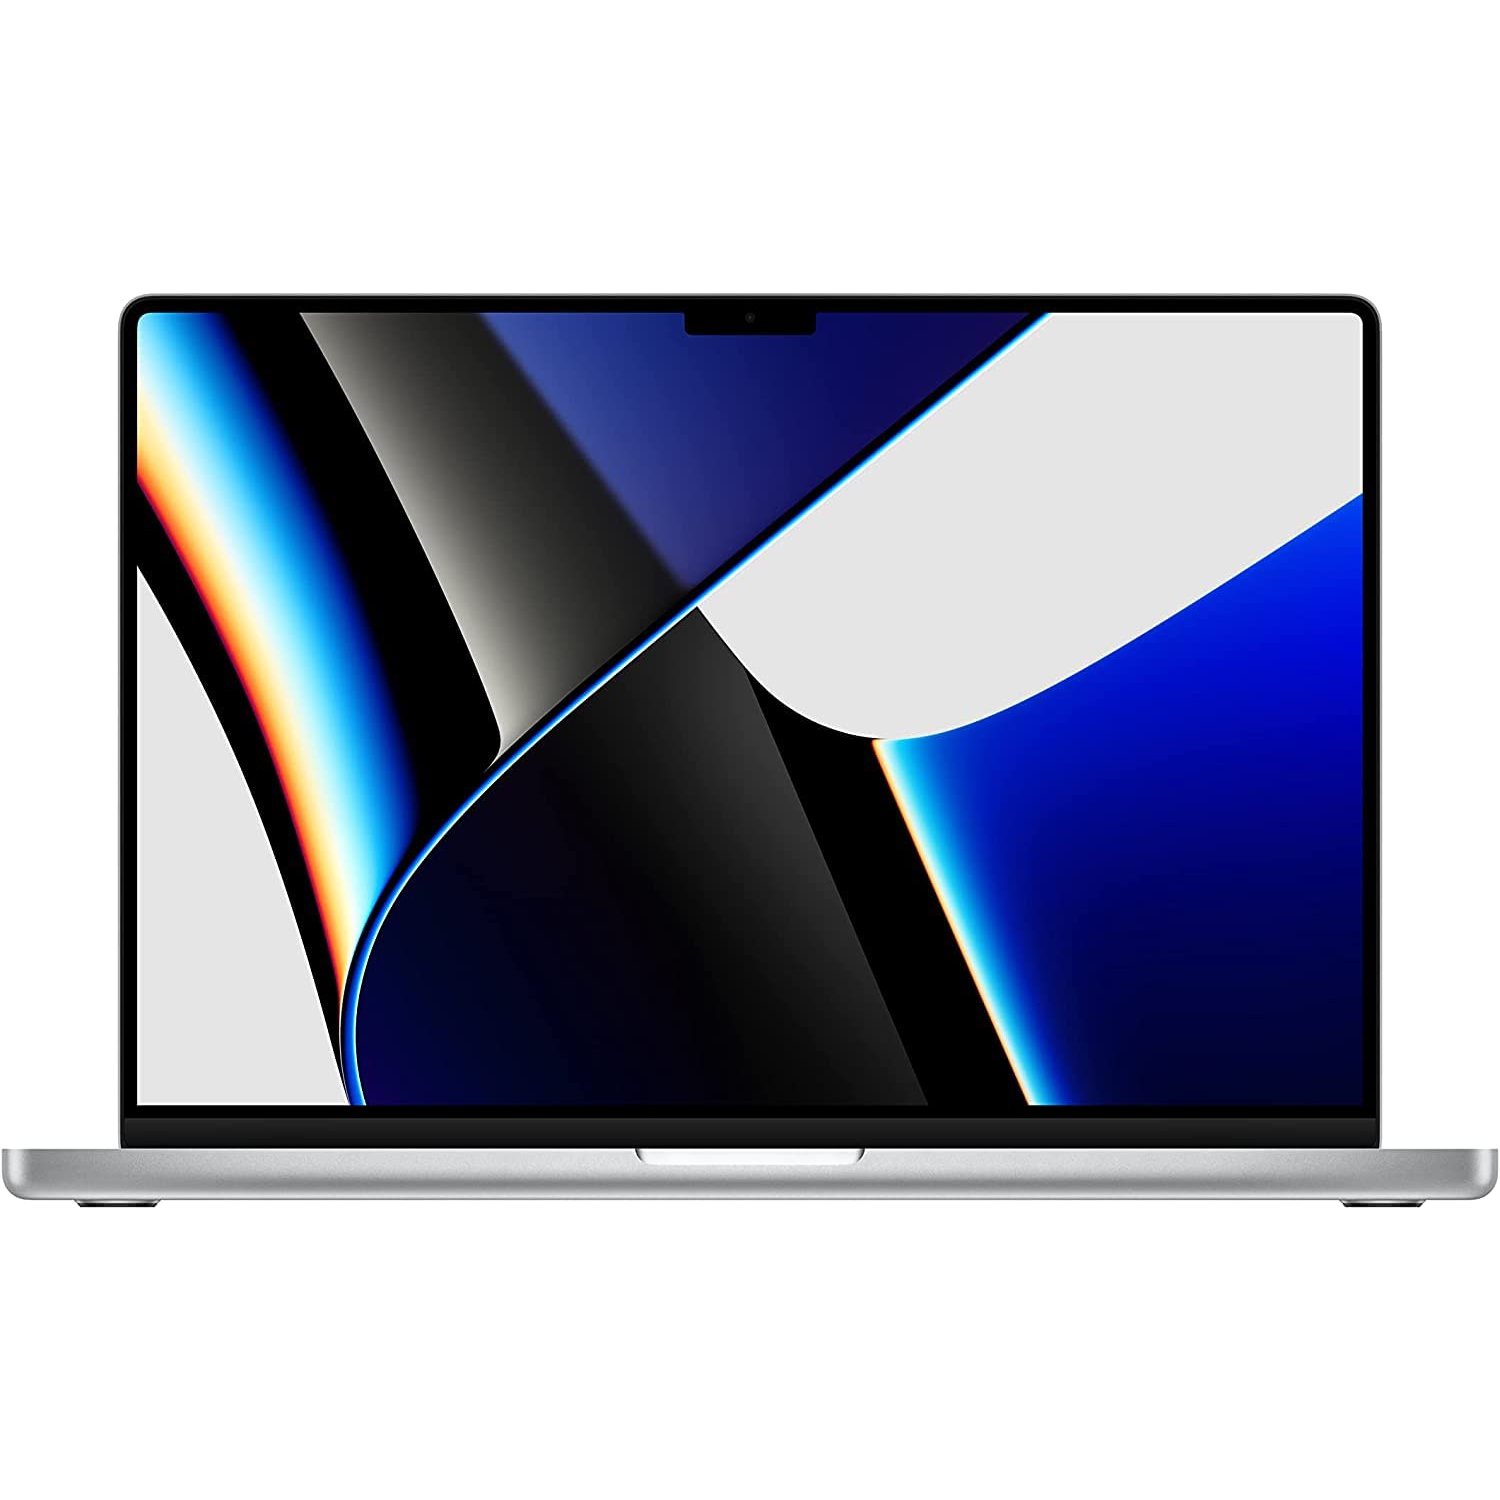 Refurbished (Excellent) - Apple MacBook Pro 16" w/ Touch ID (2021) - Silver (Apple M1 Max Chip / 1TB SSD / 32GB RAM) - English